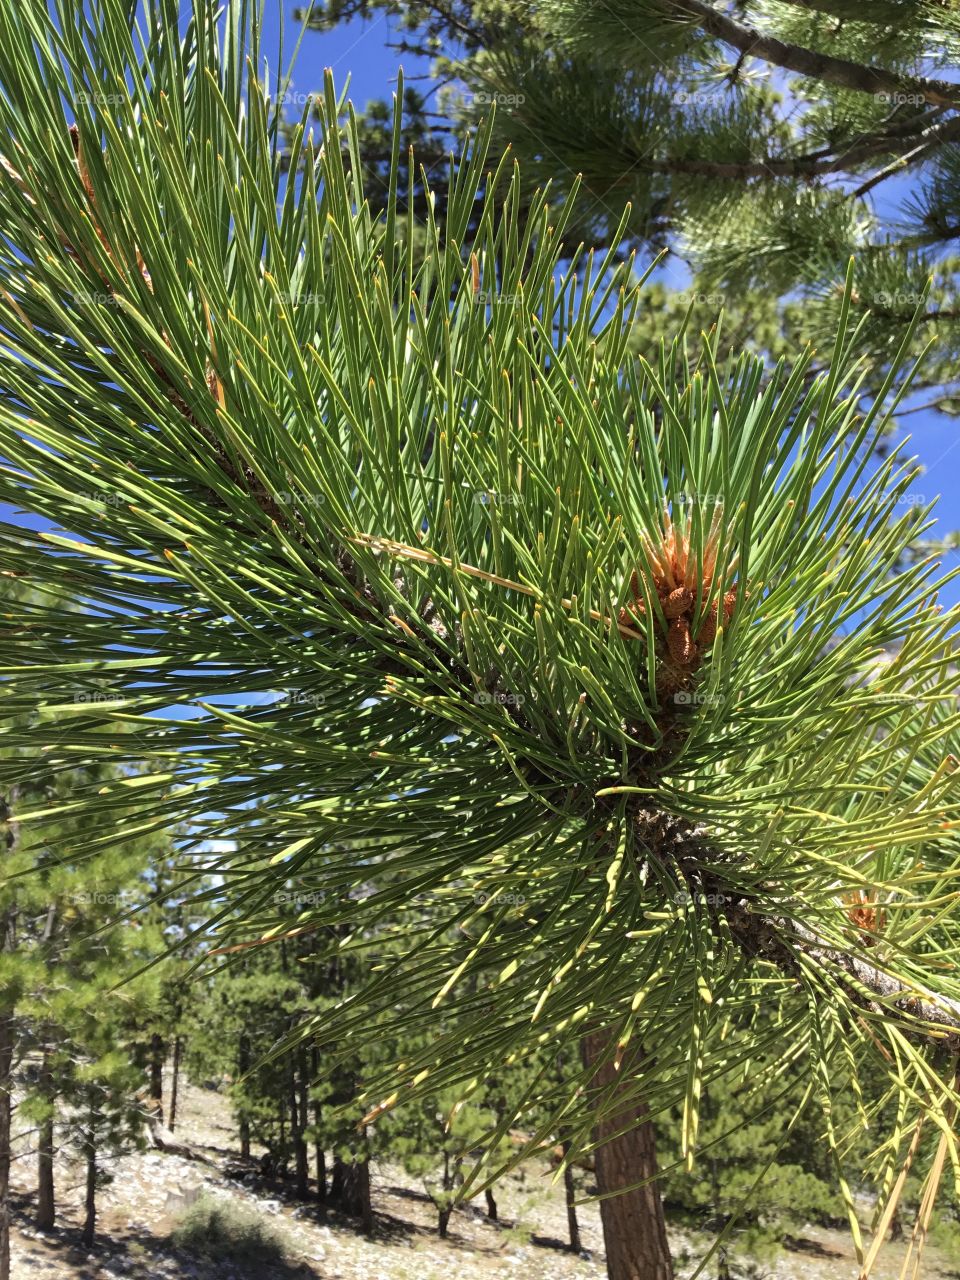 Up close with the pine tree